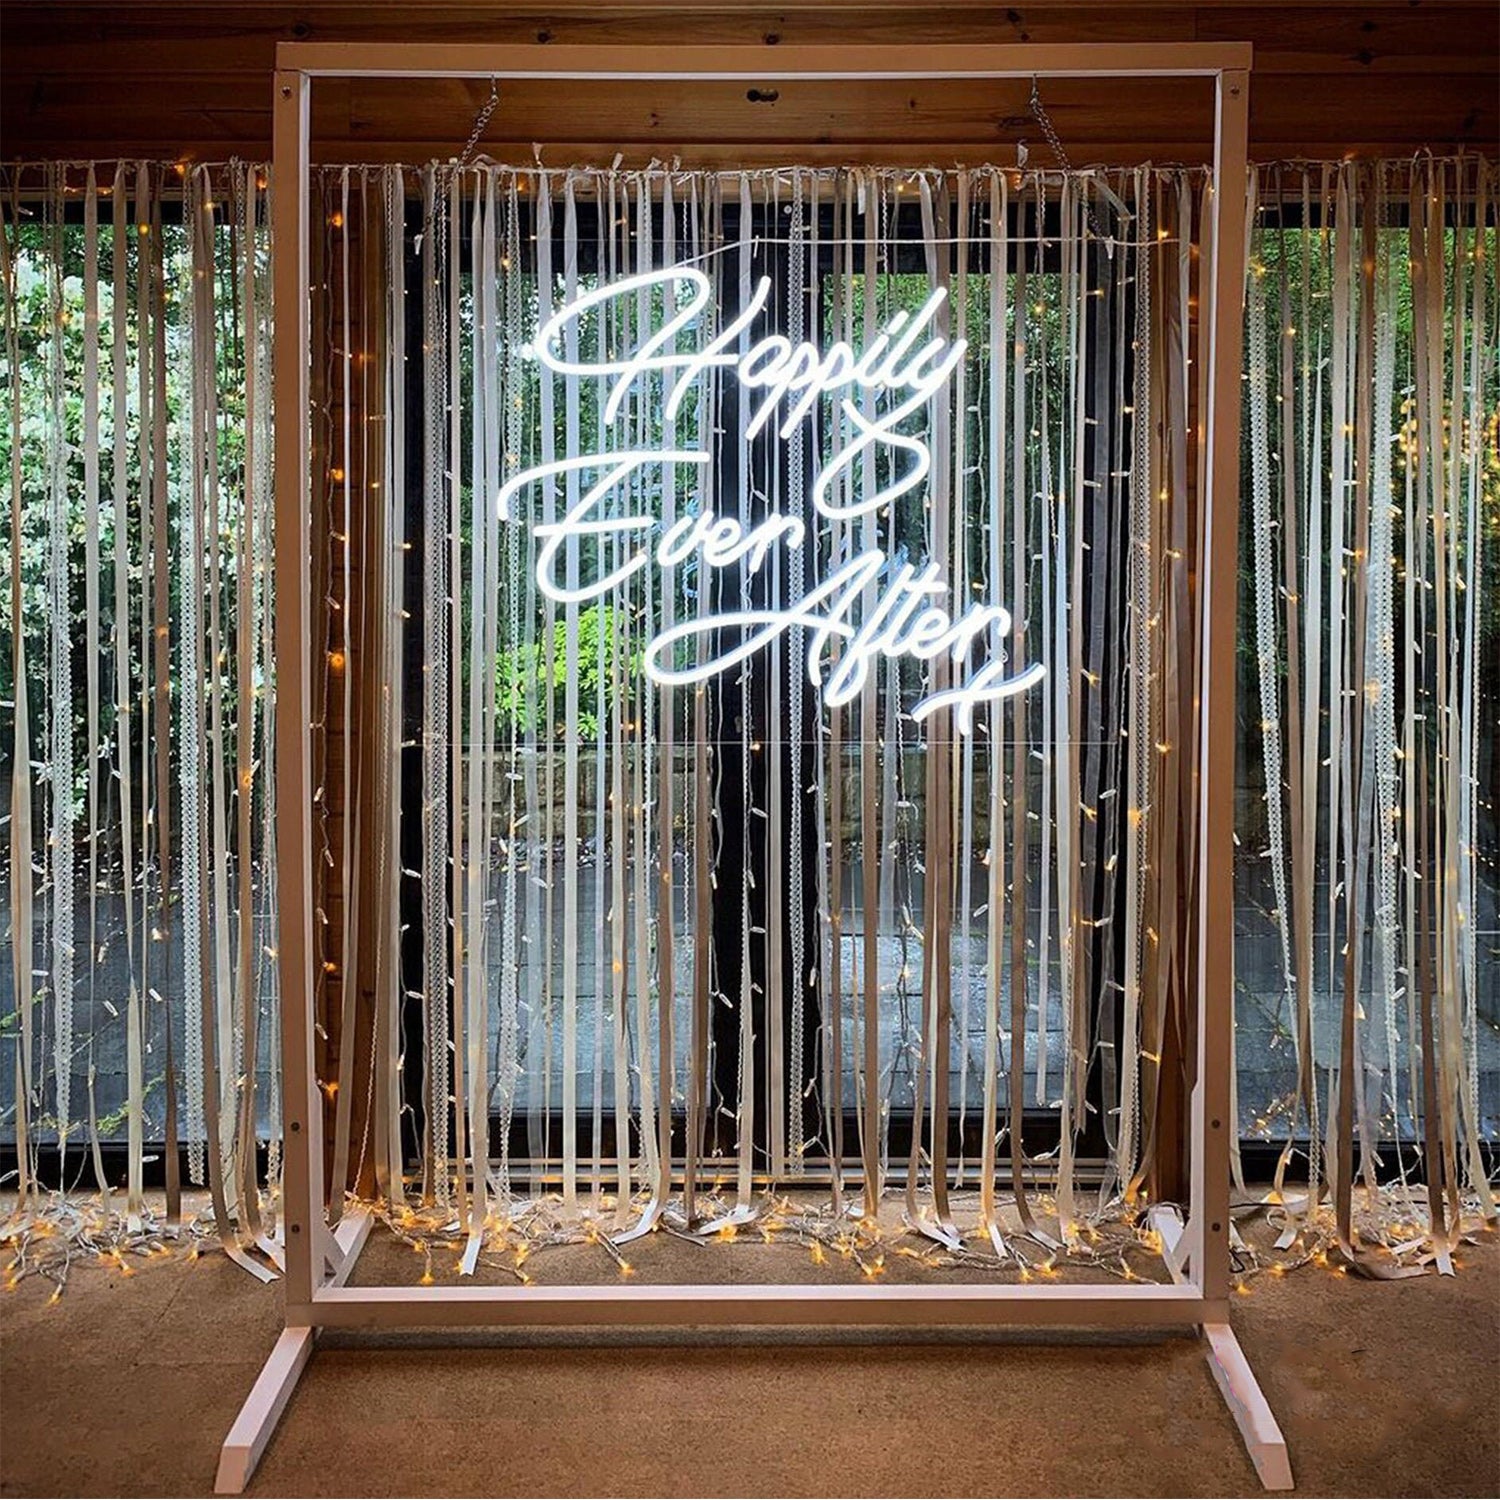 NEONIP-100% Handmade Happily Ever After LED Neon Wedding Sign